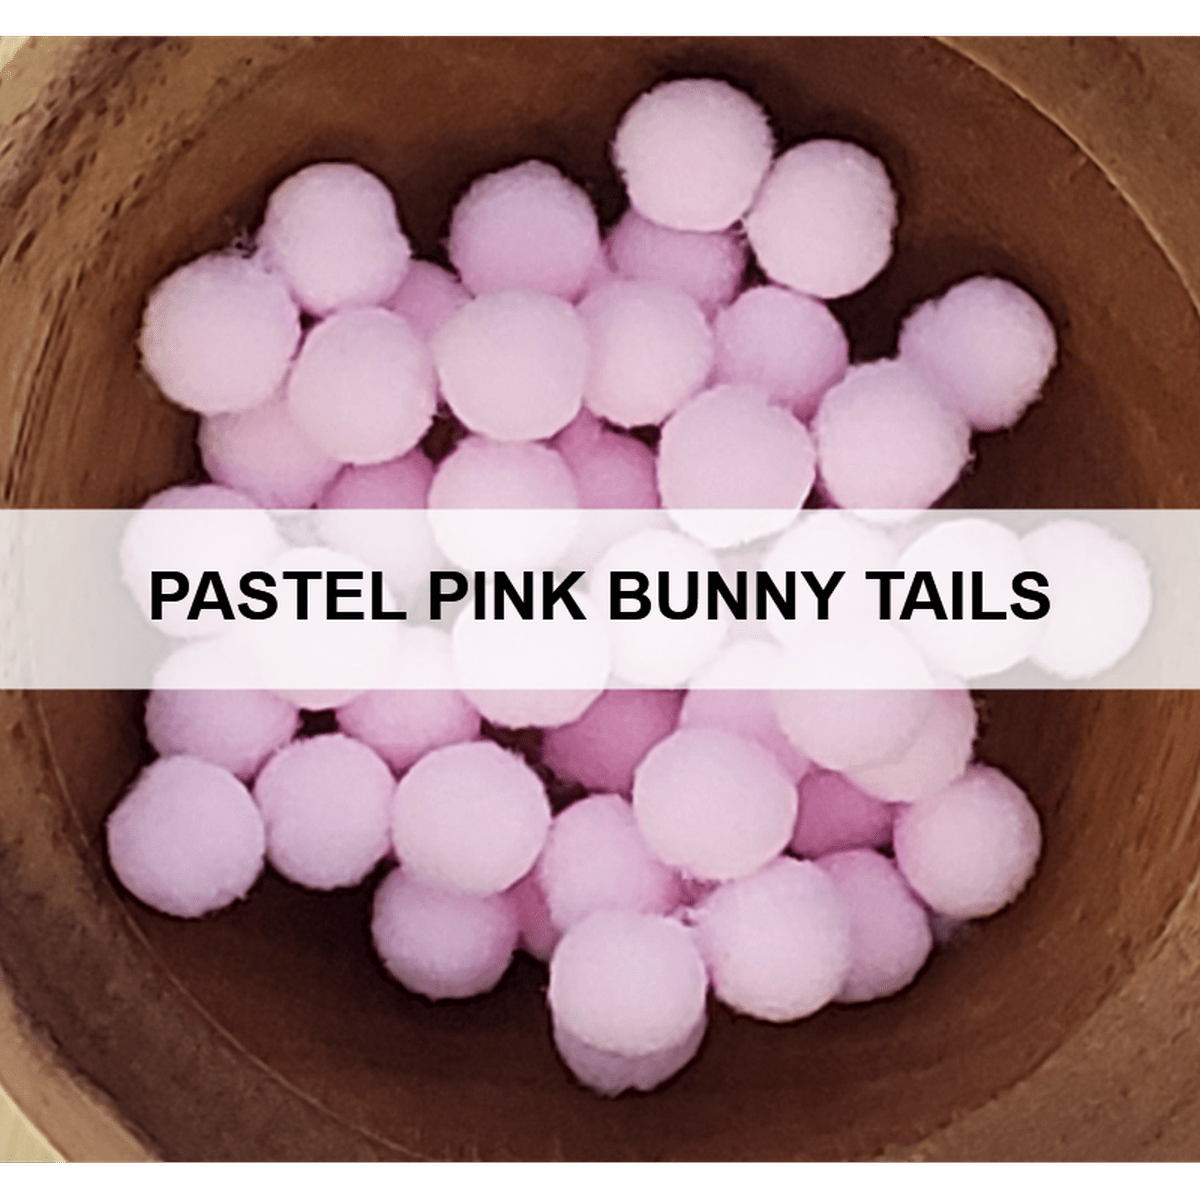 Pastel Pink Bunny Tails - Kat Scrappiness